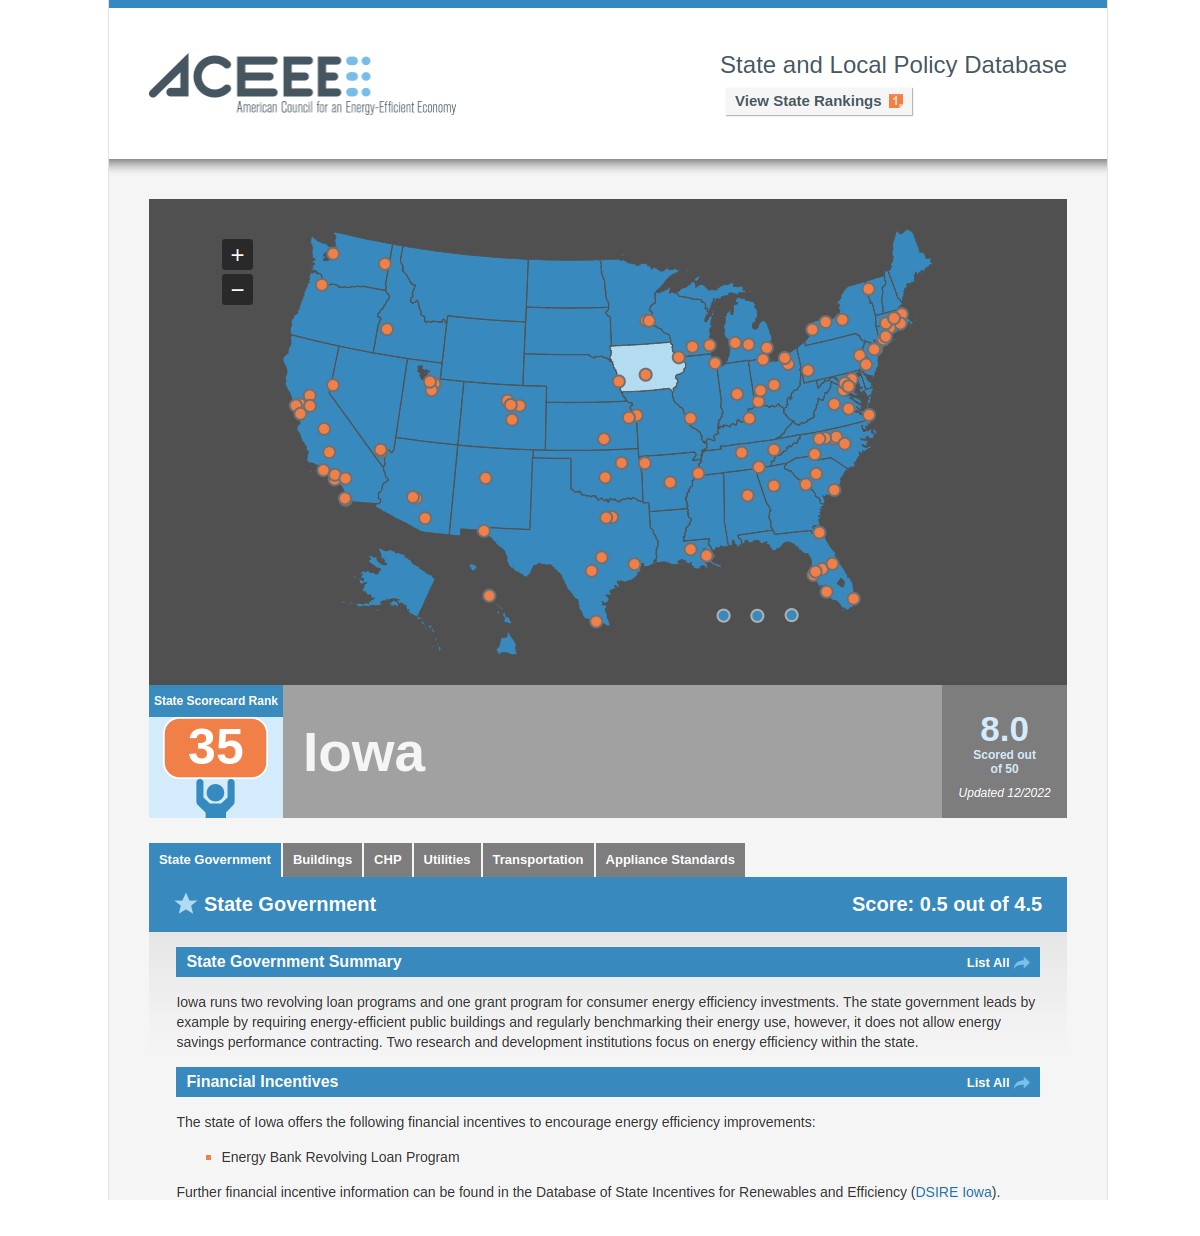 The American Council for an Energy-Efficient Economy (ACEEE)